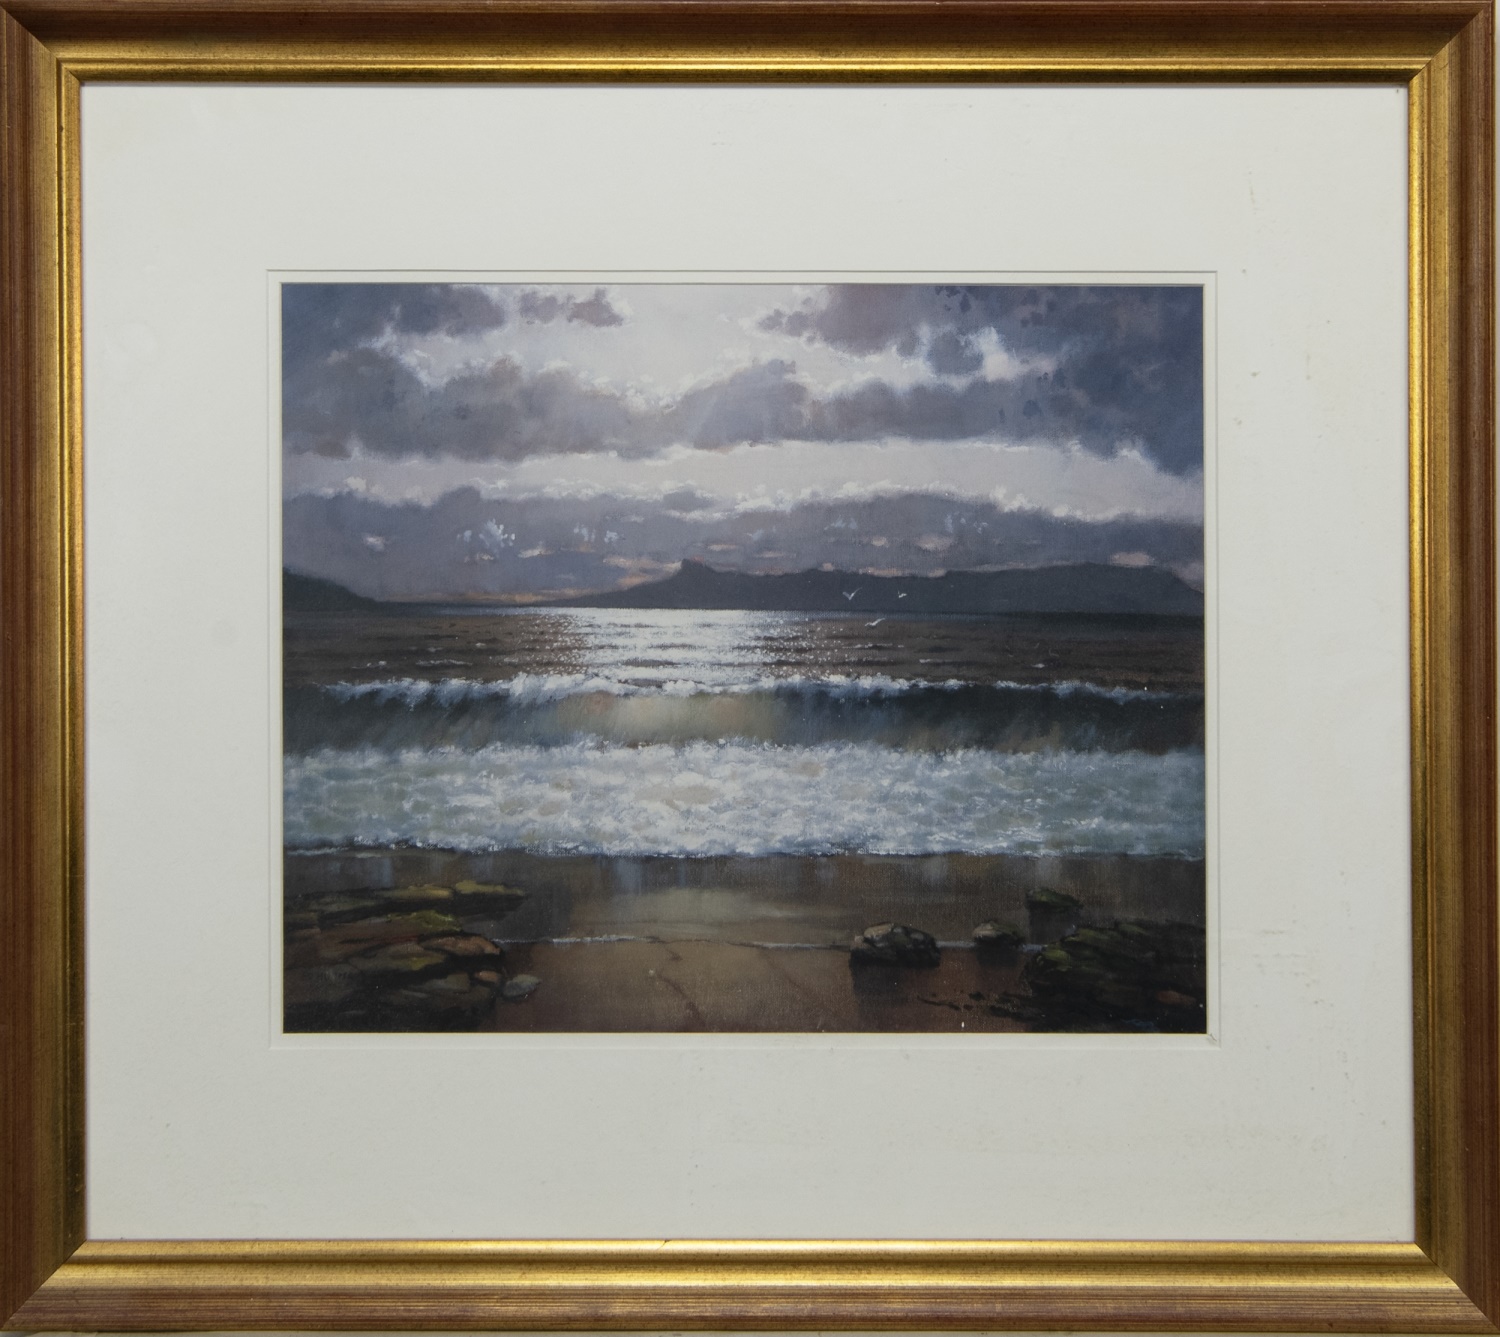 EVENING LIGHT, A LIMITED EDITION PRINT BY ED HUNTER